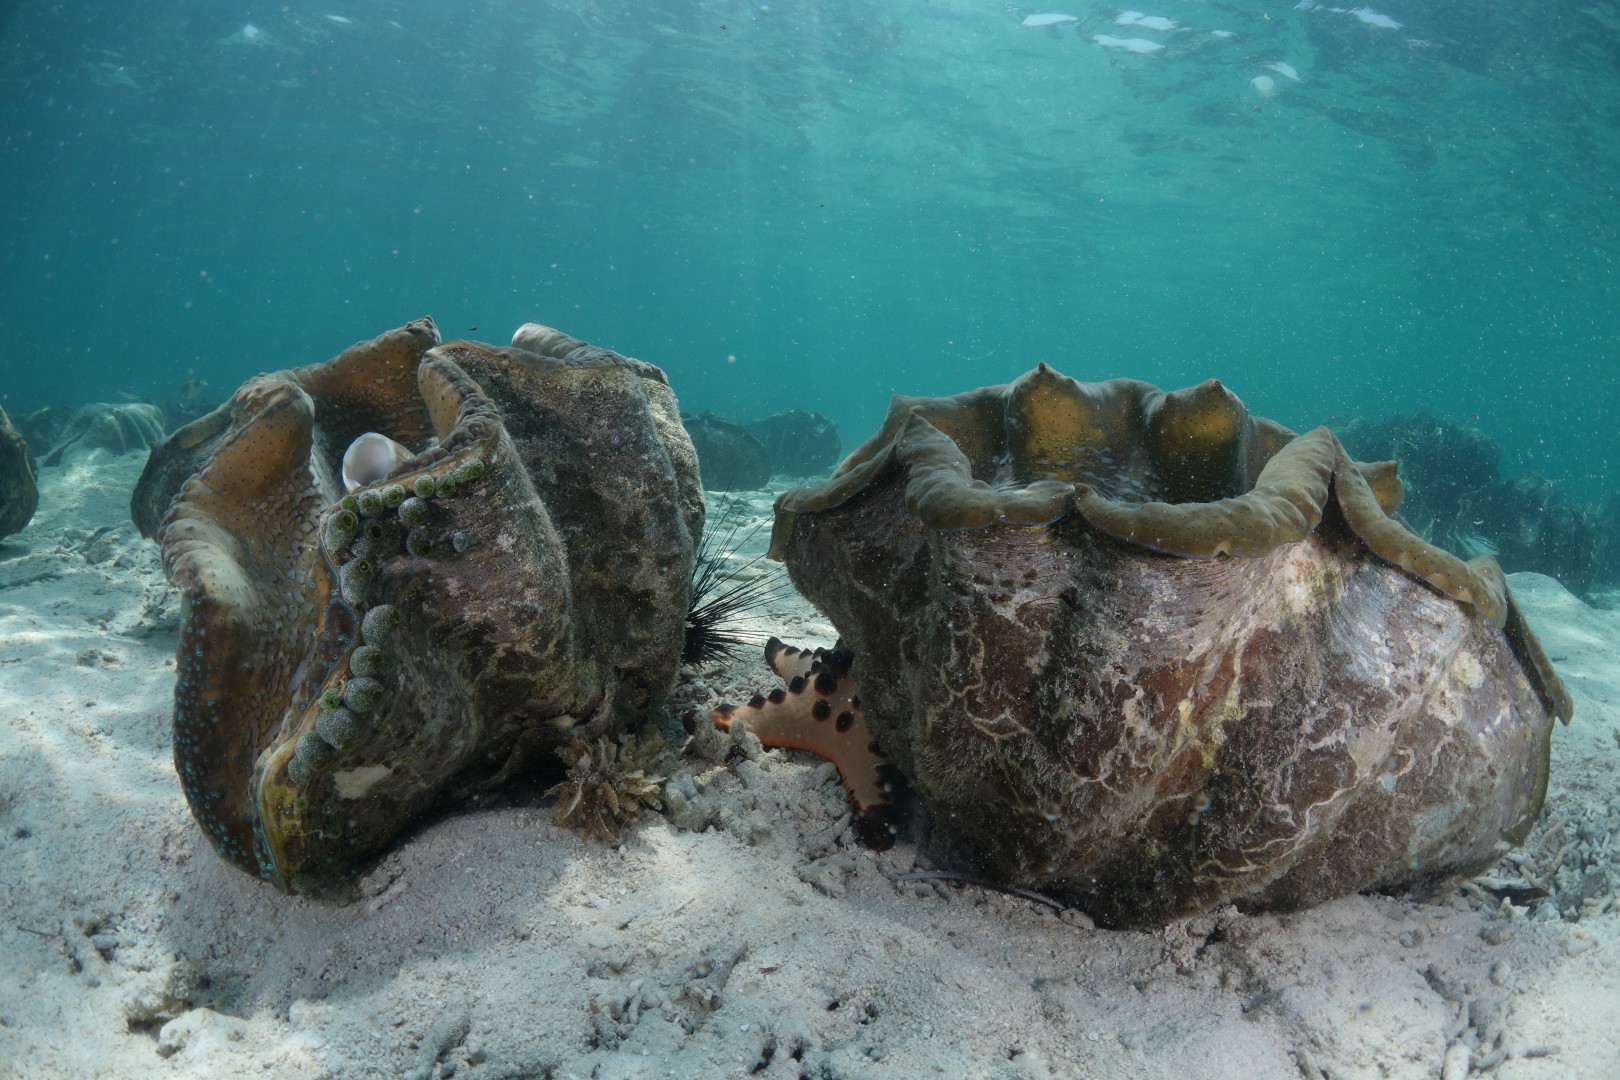 Hope for the oceans: The Giant Clam Nursery - A Bugged Life